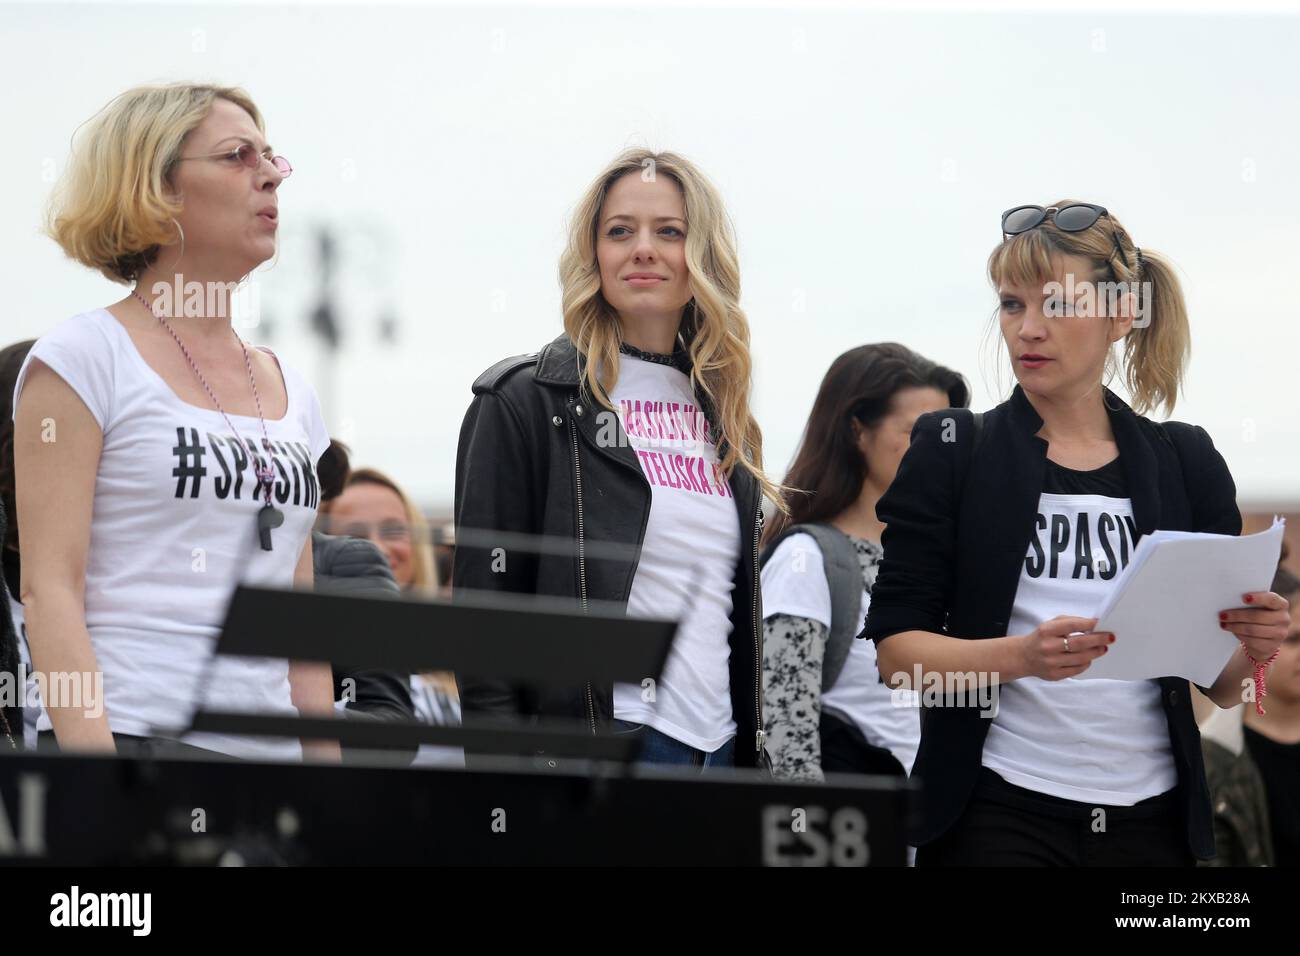 16.03.2019., King Tomislav Square. Zagreb, Croatia - Supporters of the #spasime (#saveme) social network movement carry a sing during a protest against domestic violence. Organizer of the #Spasime (#Saveme) campaign, Croatian actress and producer Jelena Veljaca. Photo: Dalibor Urukalovic/PIXSELL Stock Photo